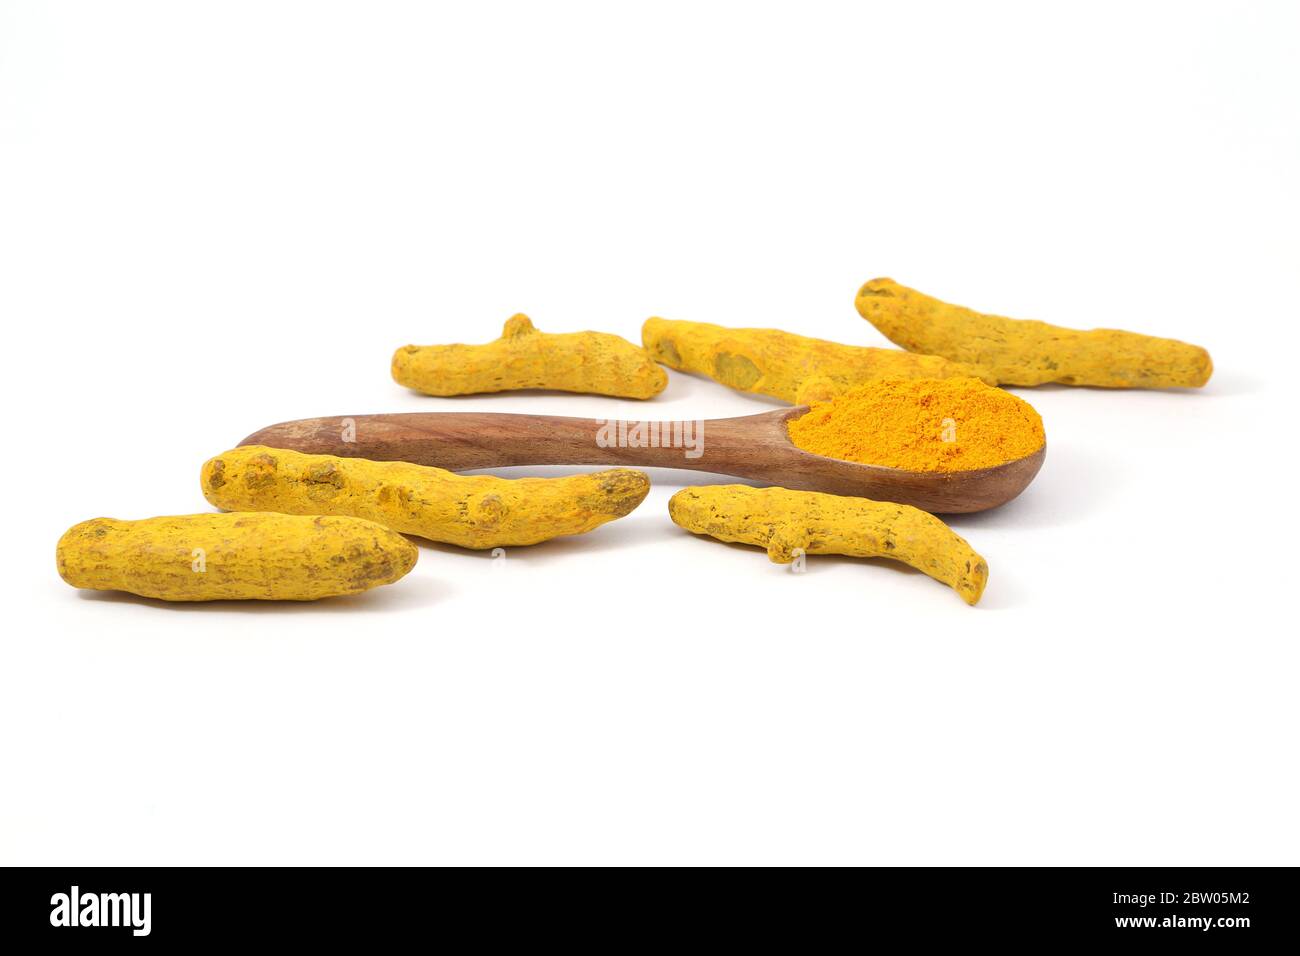 Turmeric powder and roots Stock Photo